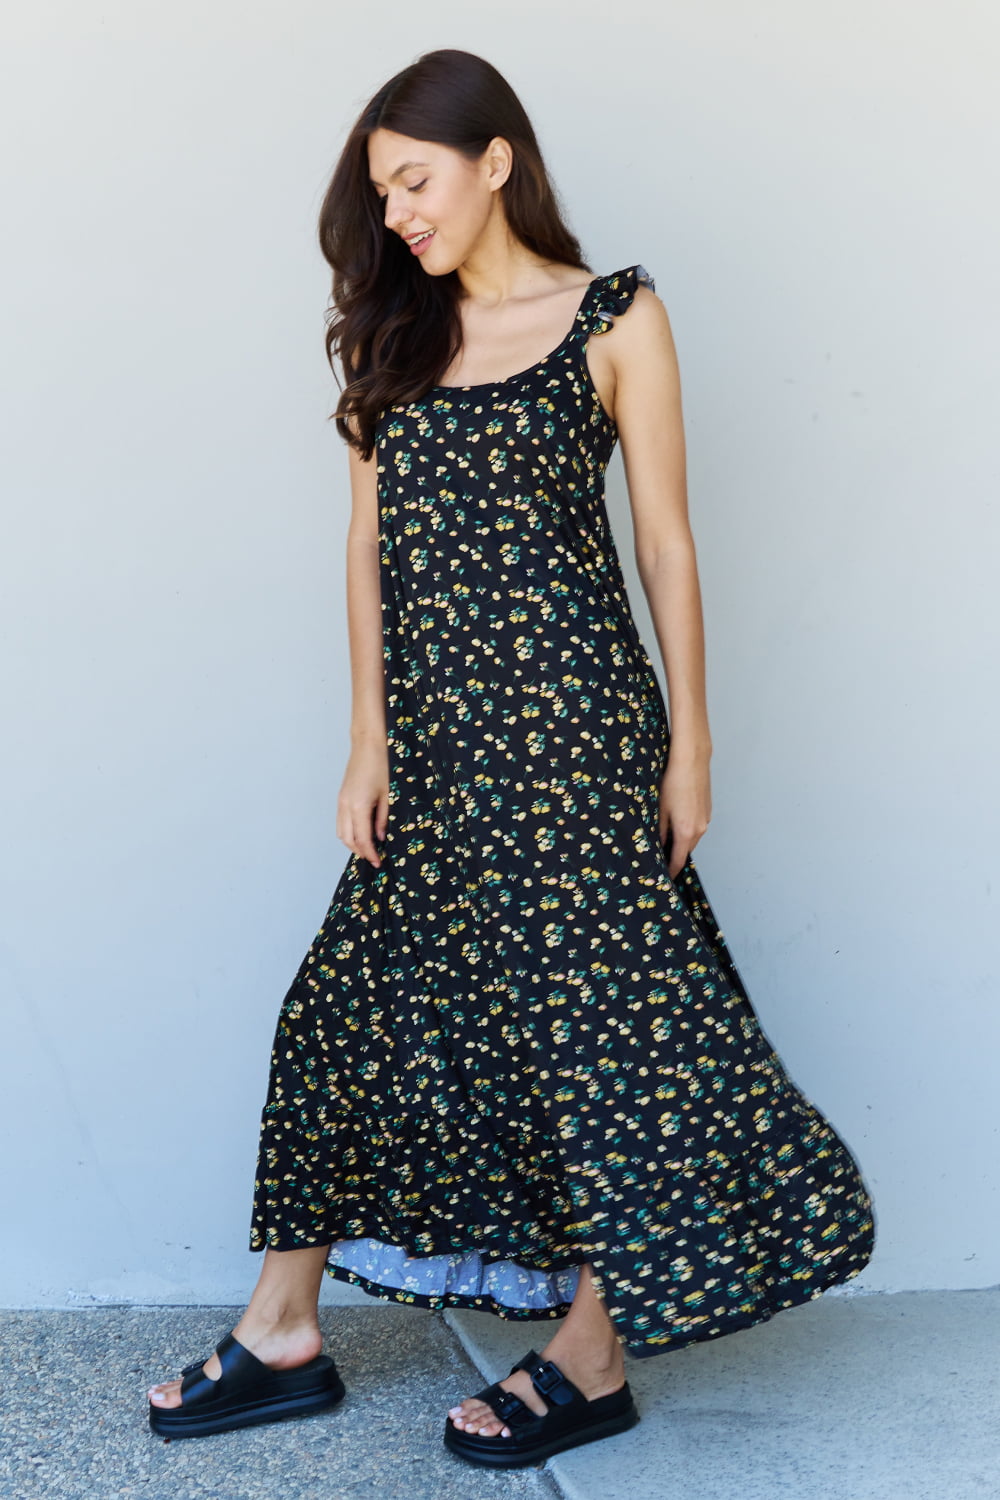 The Garden Ruffle Floral Maxi Dress in Black Yellow Floral - All Dresses - Dresses - 4 - 2024